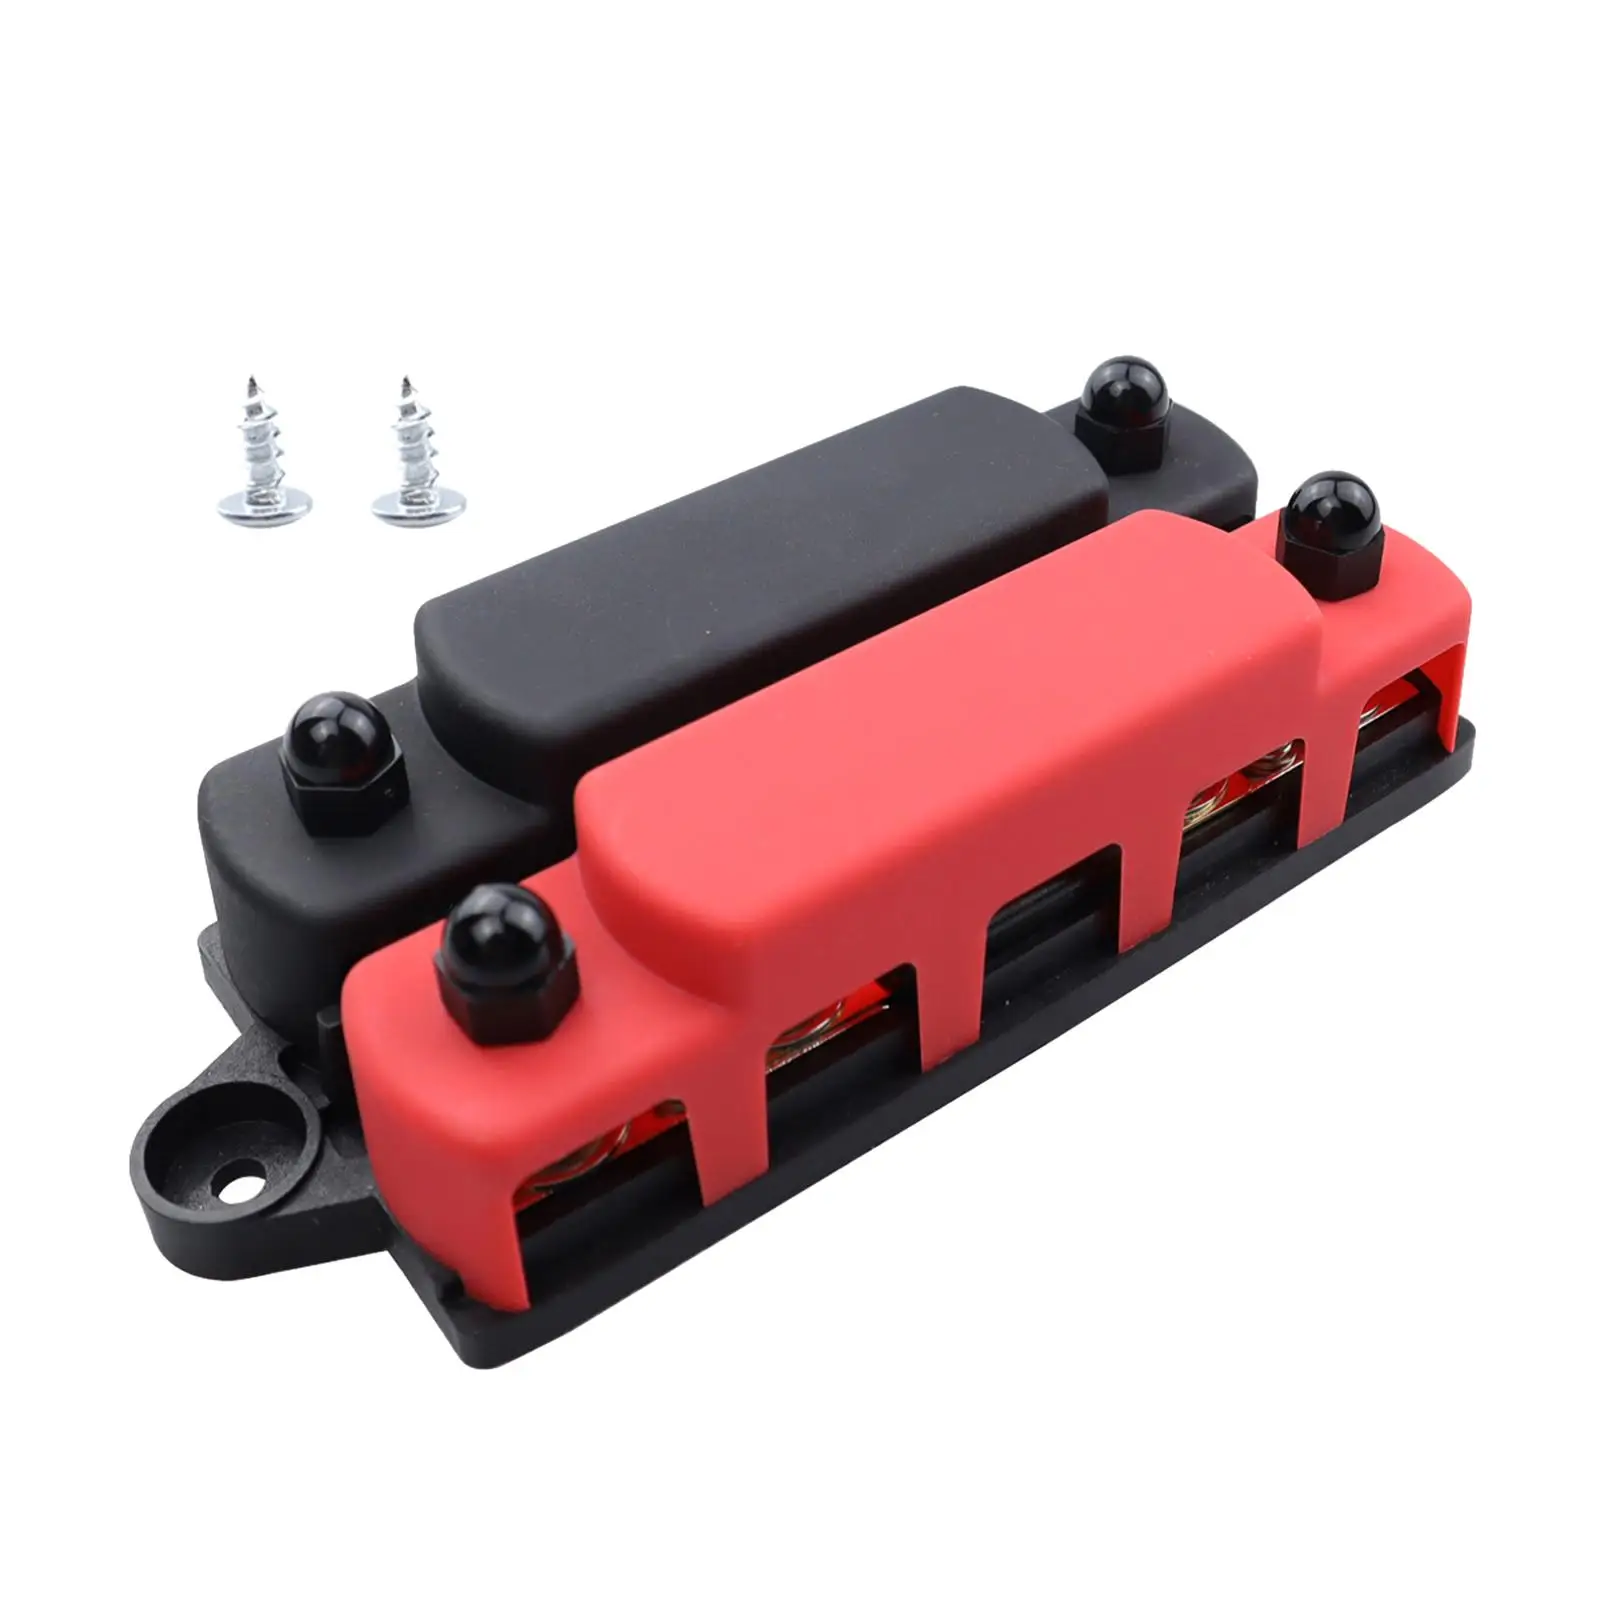 4 Post Power Distribution Block Bus Bar Accessories with Terminals Easy to Install 48V for Trailer Boat Car Yachts Durable